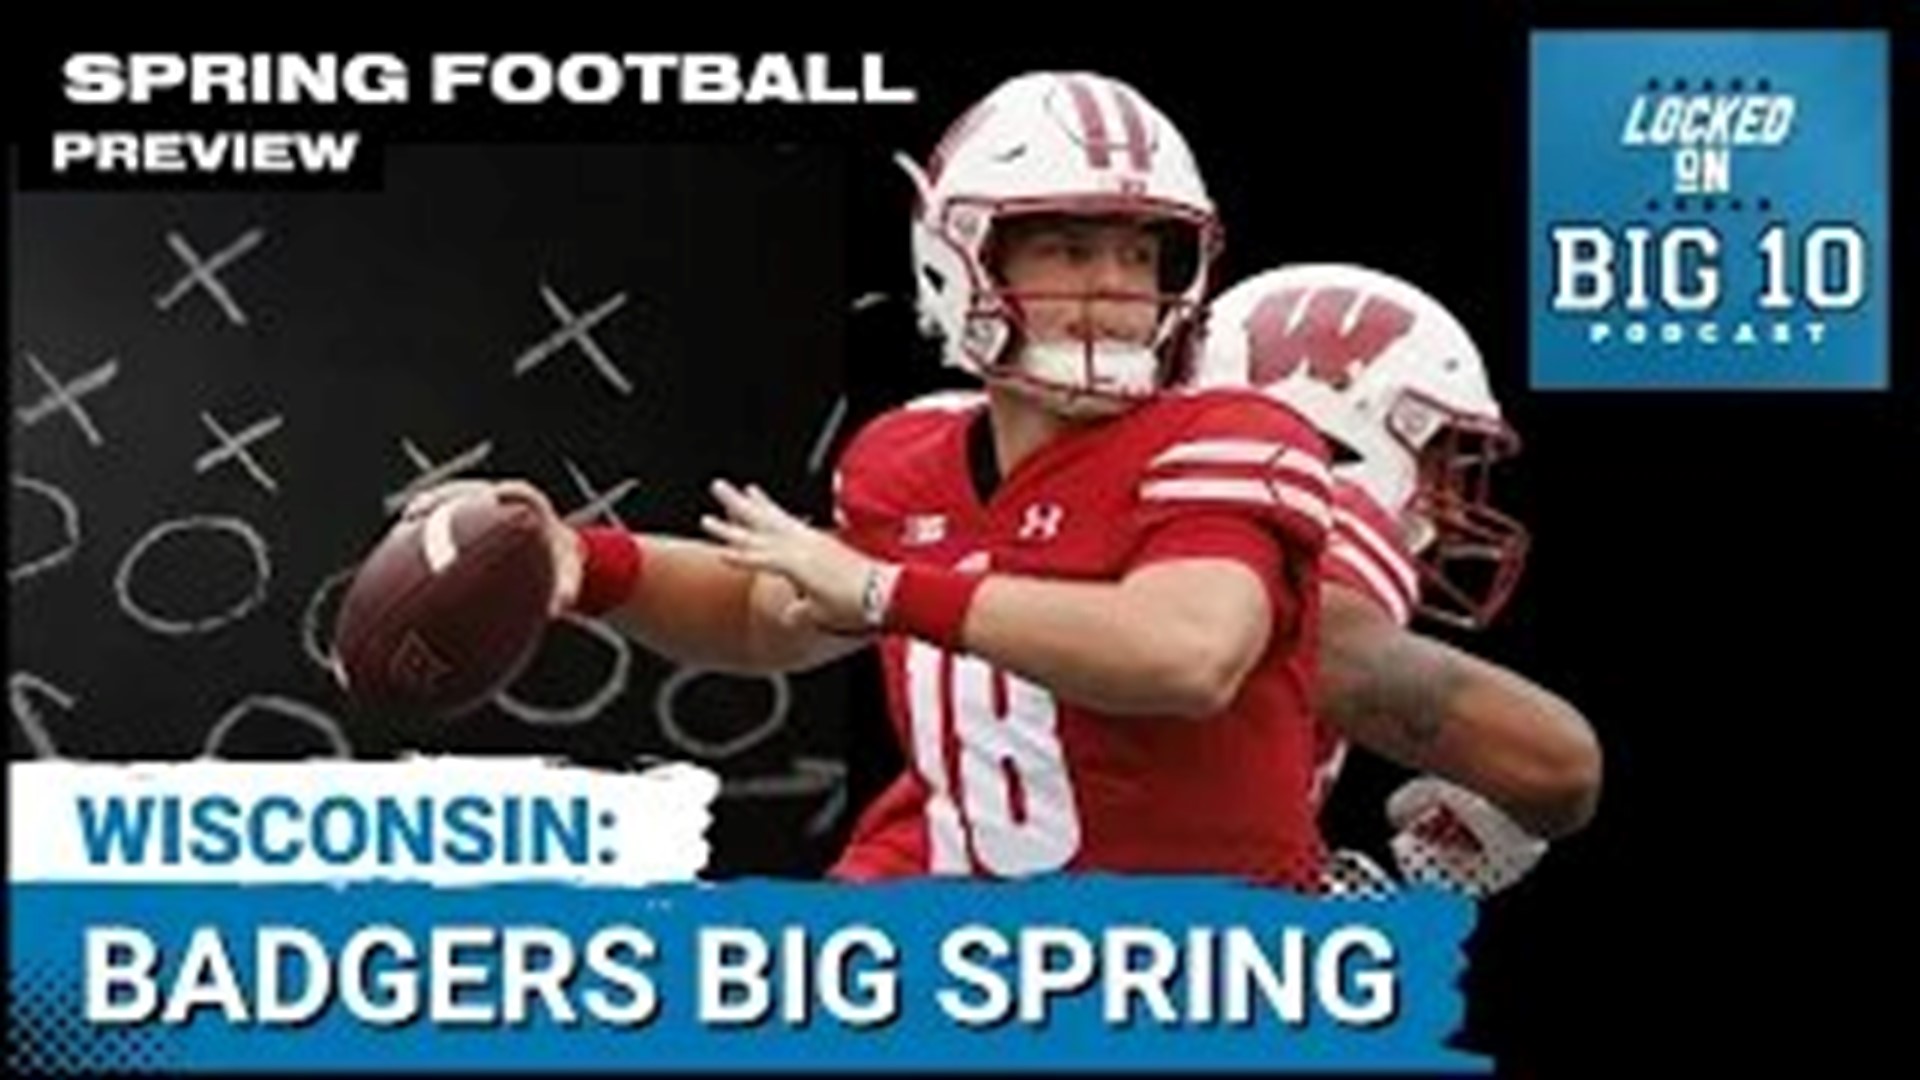 The Wisconsin football team is getting ready for spring football as Luke Fickell starts his second season in charge of the Badgers.  Fickell wants an air-raid O.